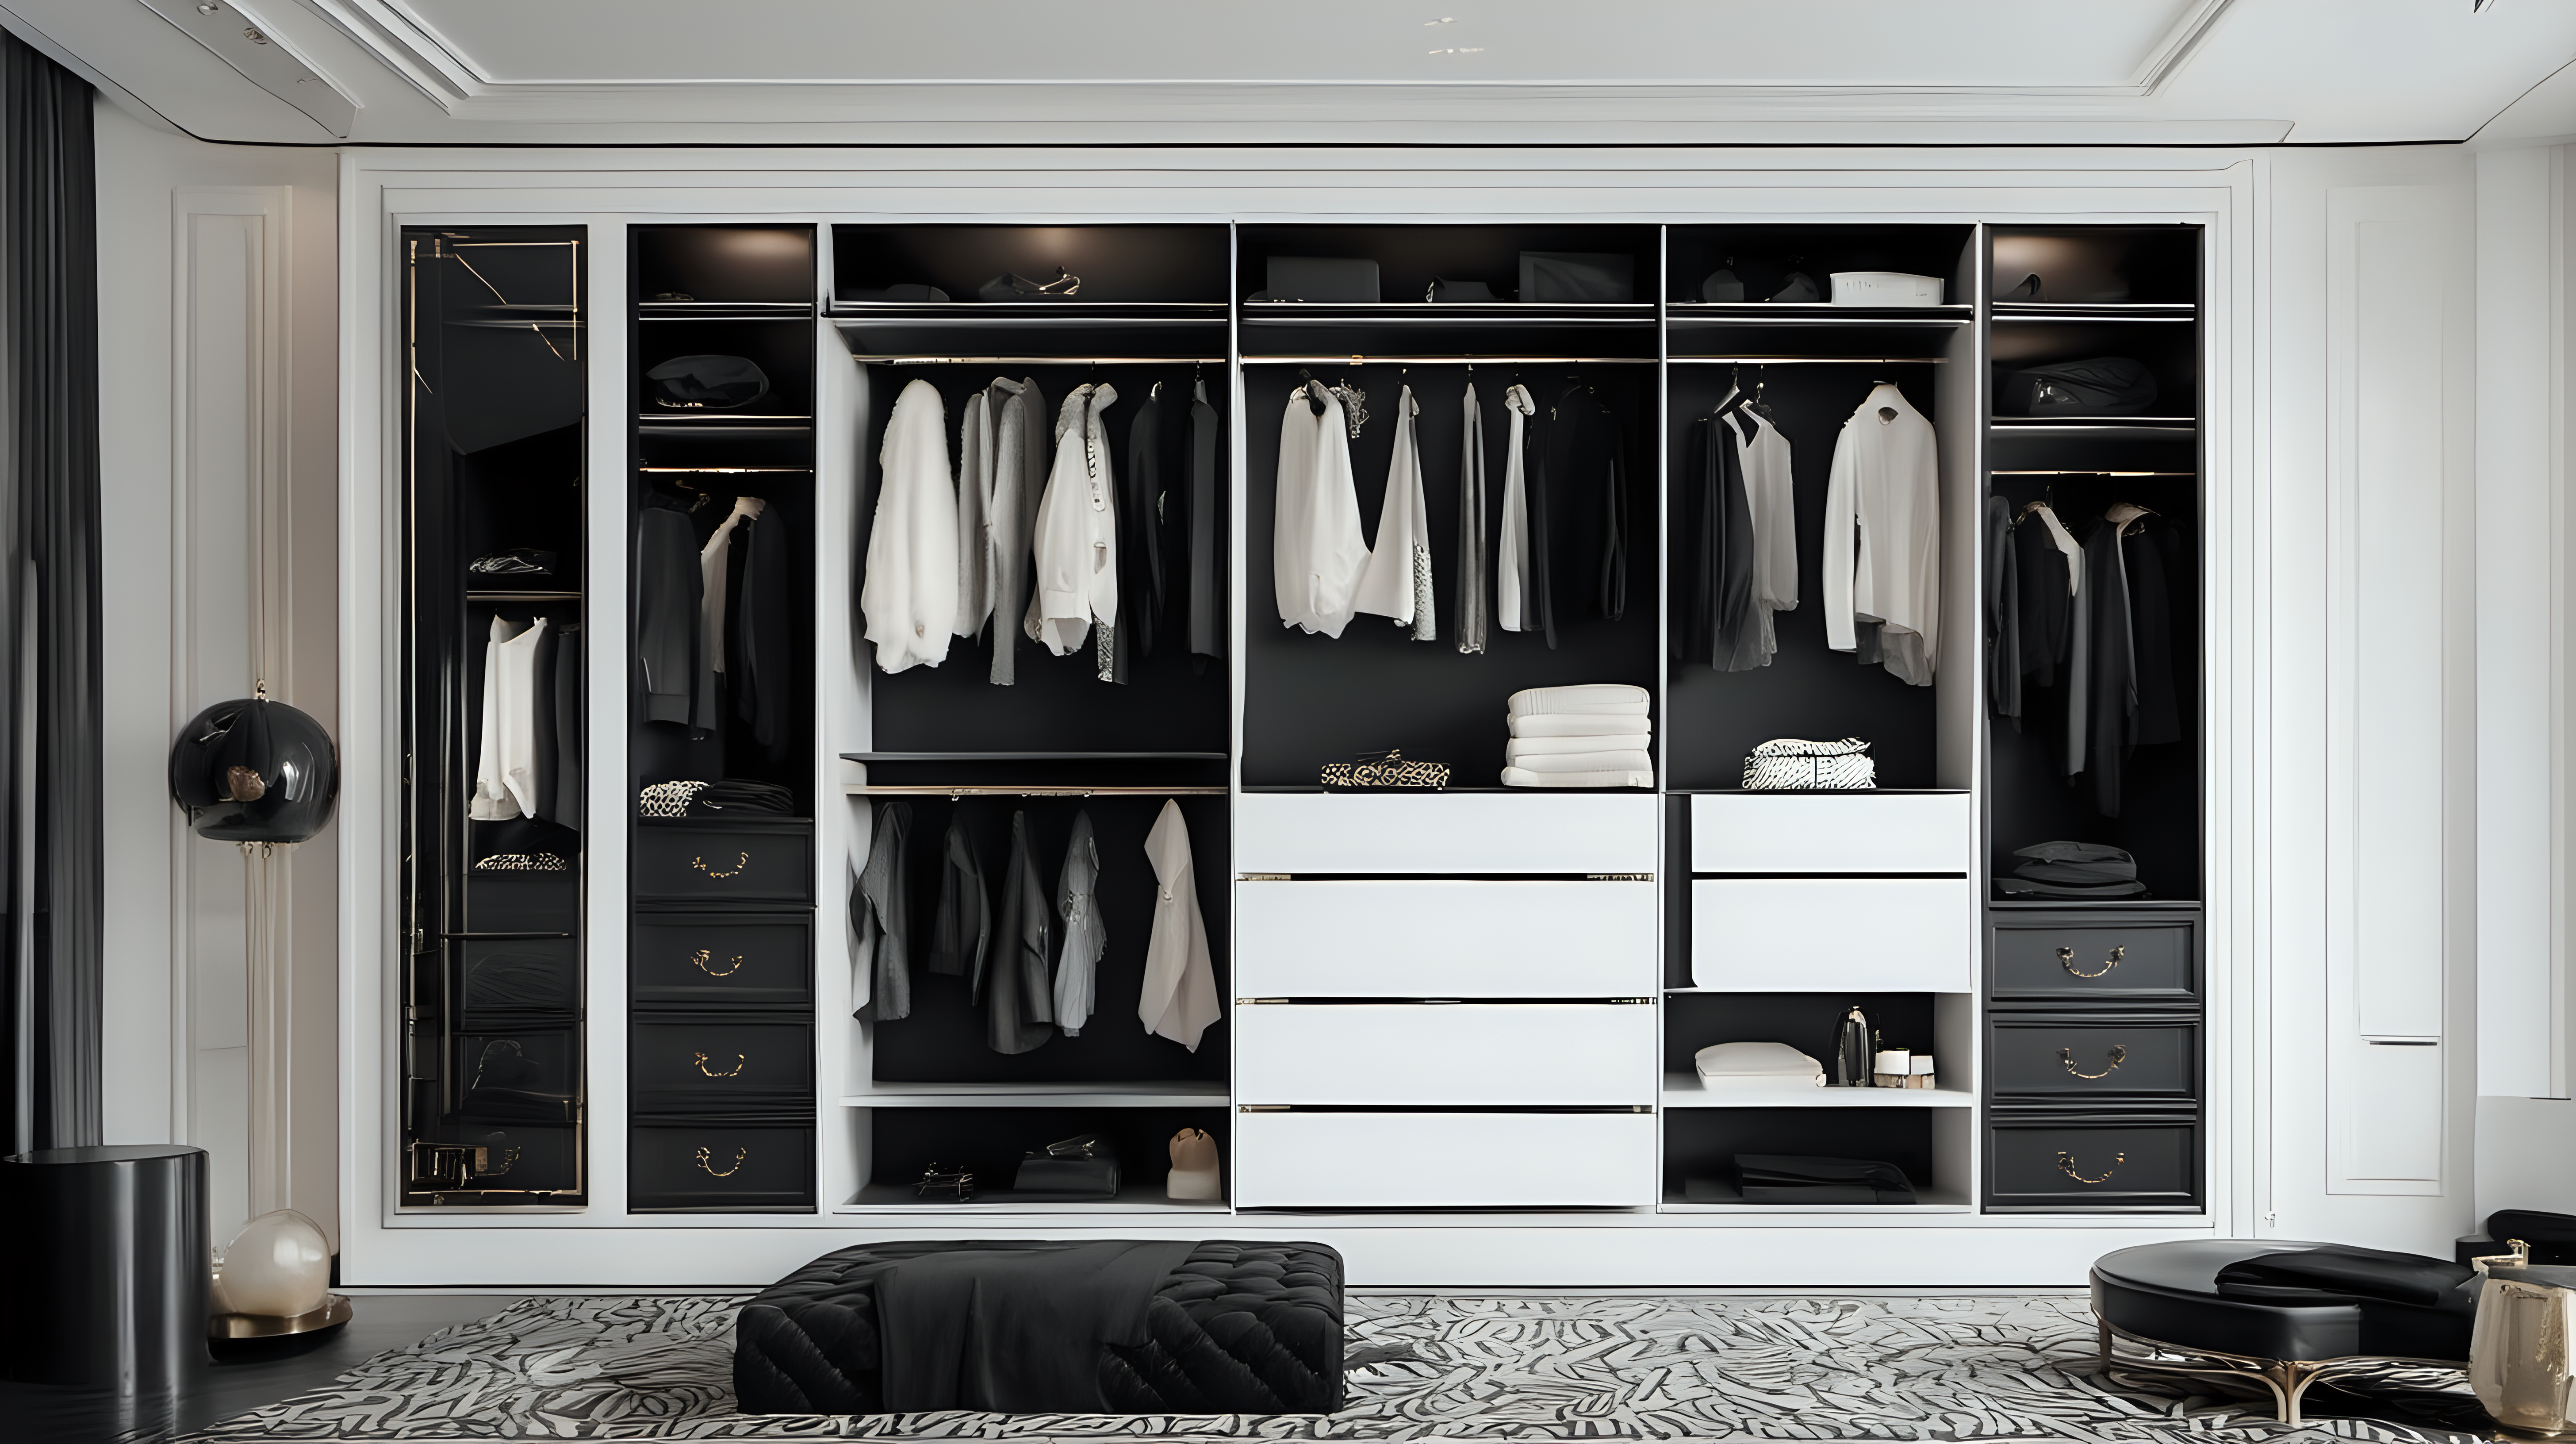 cozy Interior wardrobe with black and white luxury details